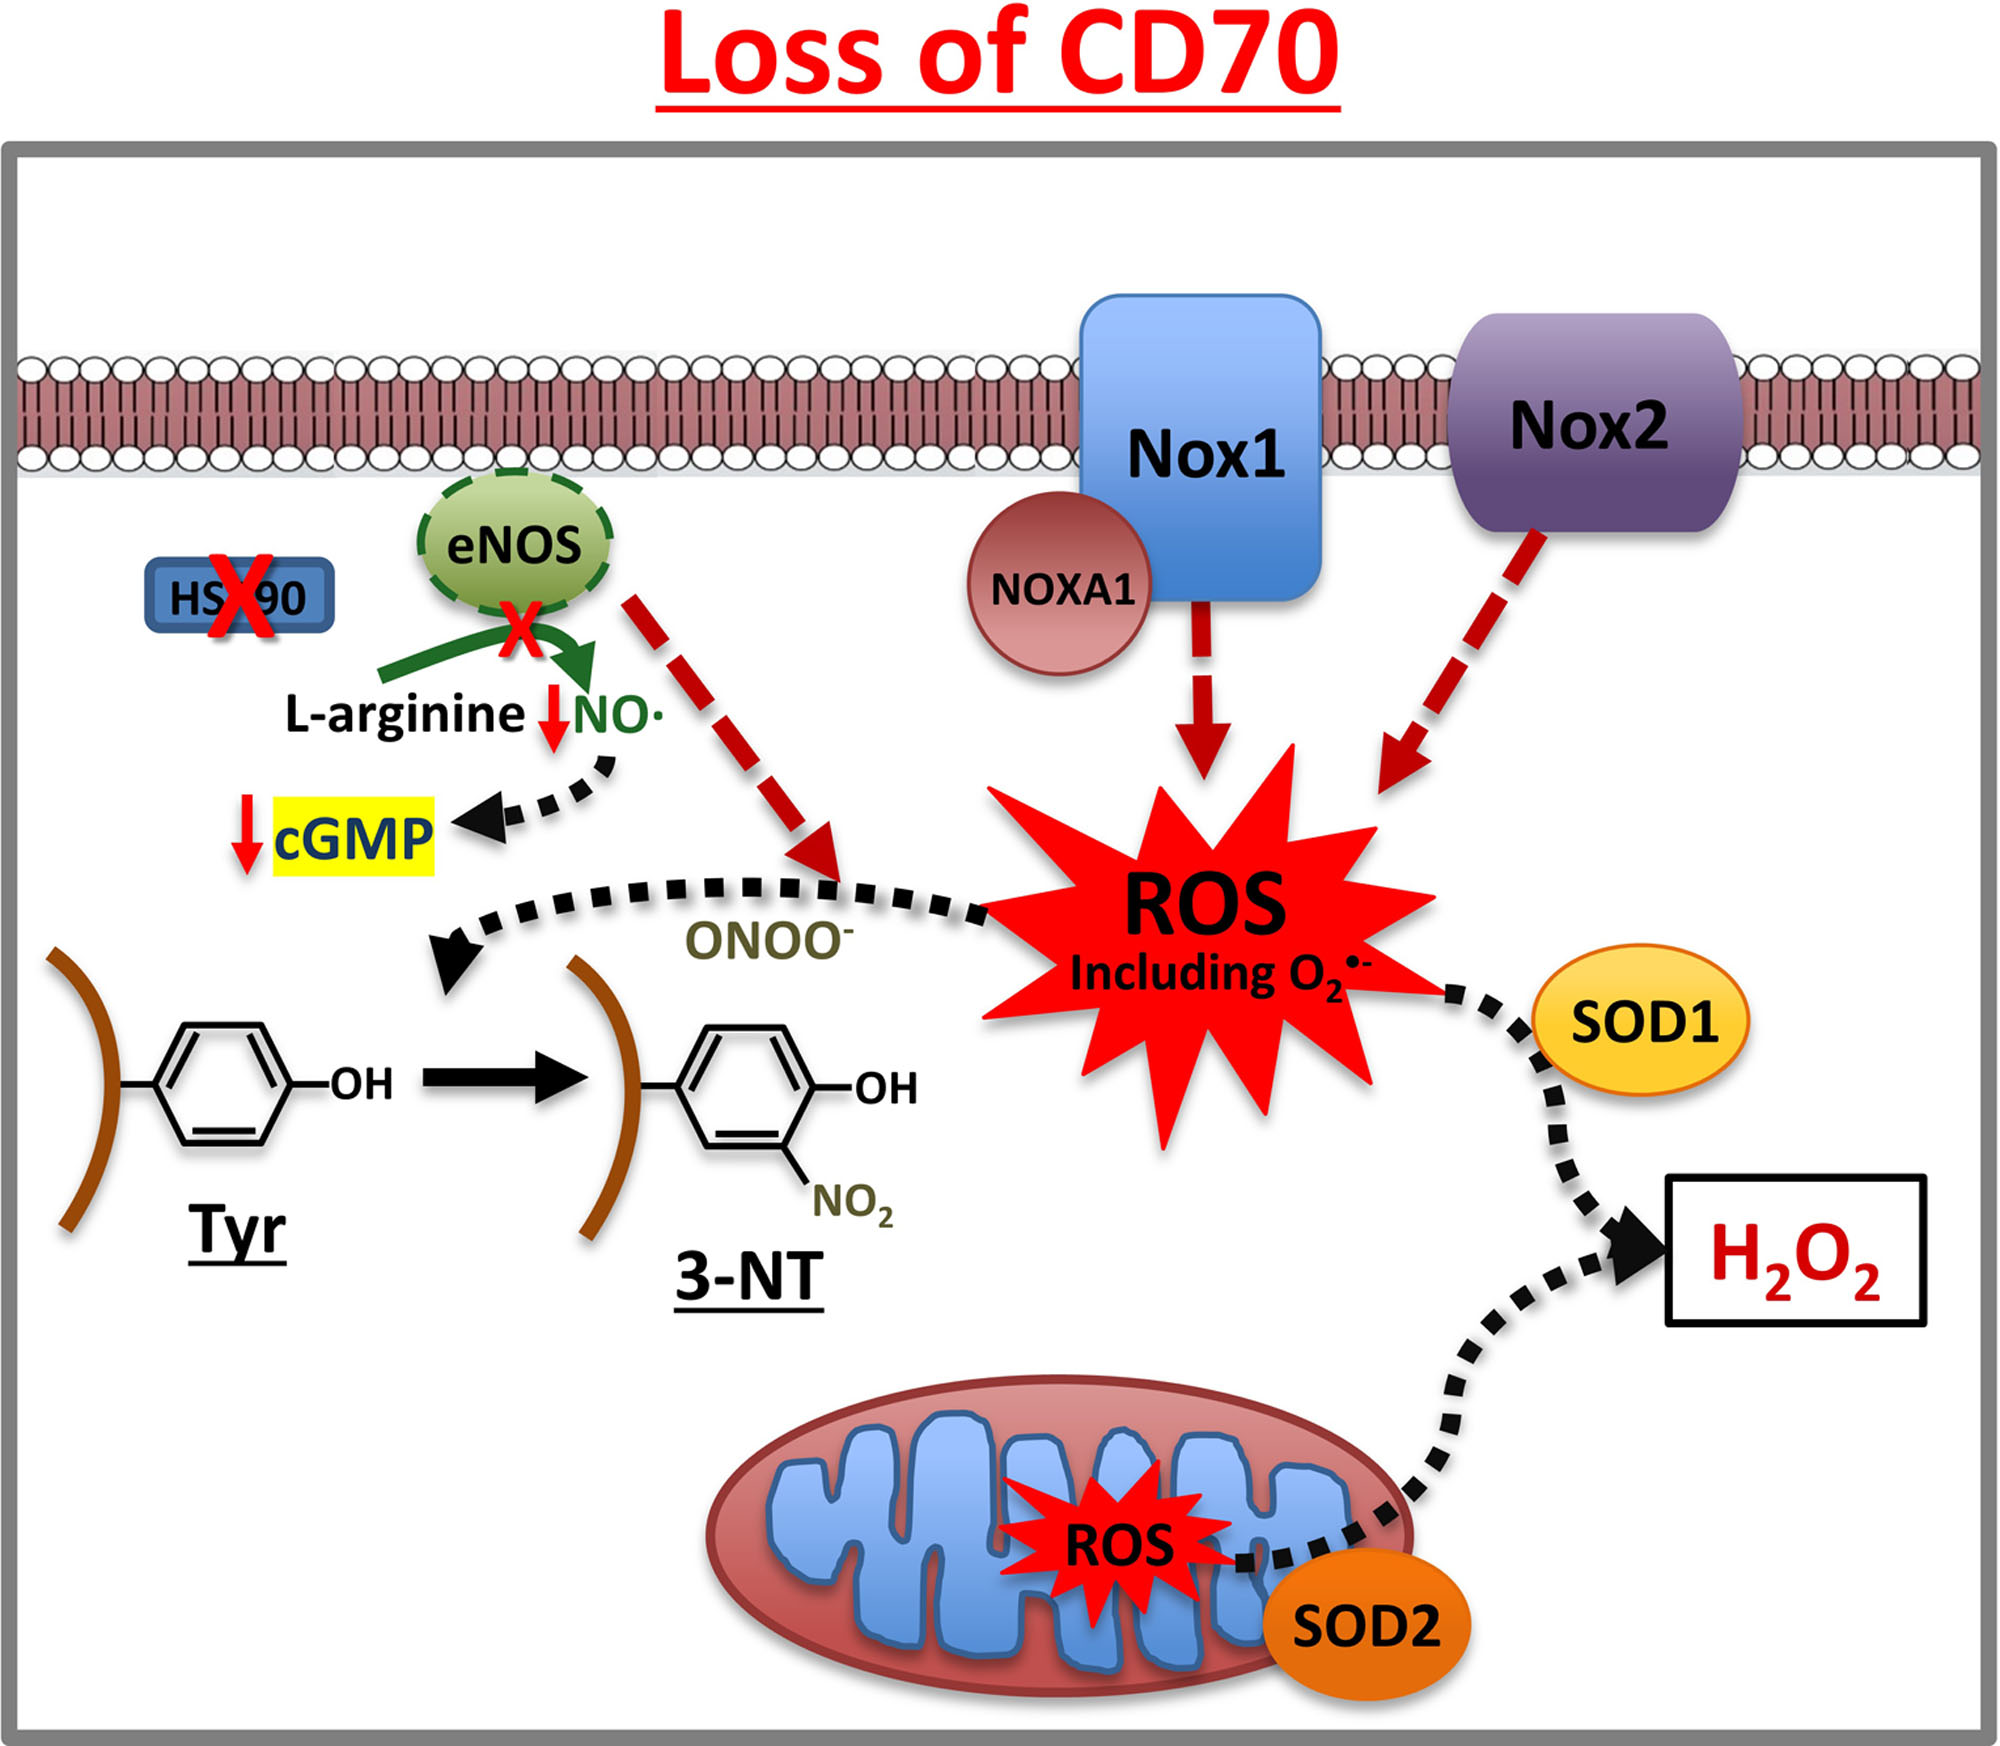 Expression of CD70 Modulates Nitric Oxide and Redox Status in Endothelial Cells